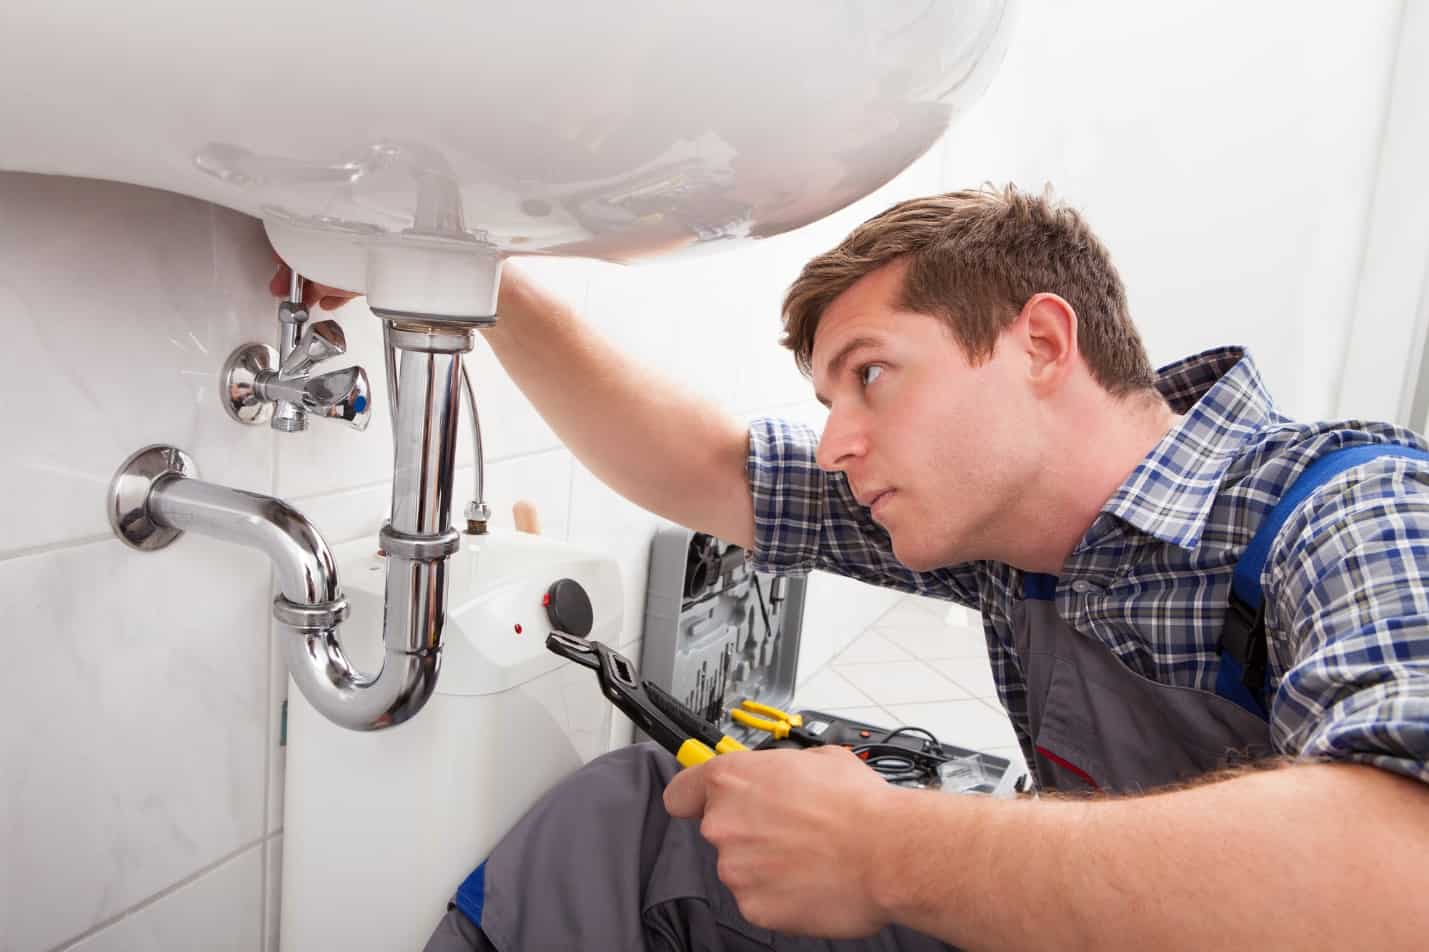 Wappingers Falls NY Plumbers Near You – Best Plumbing Services